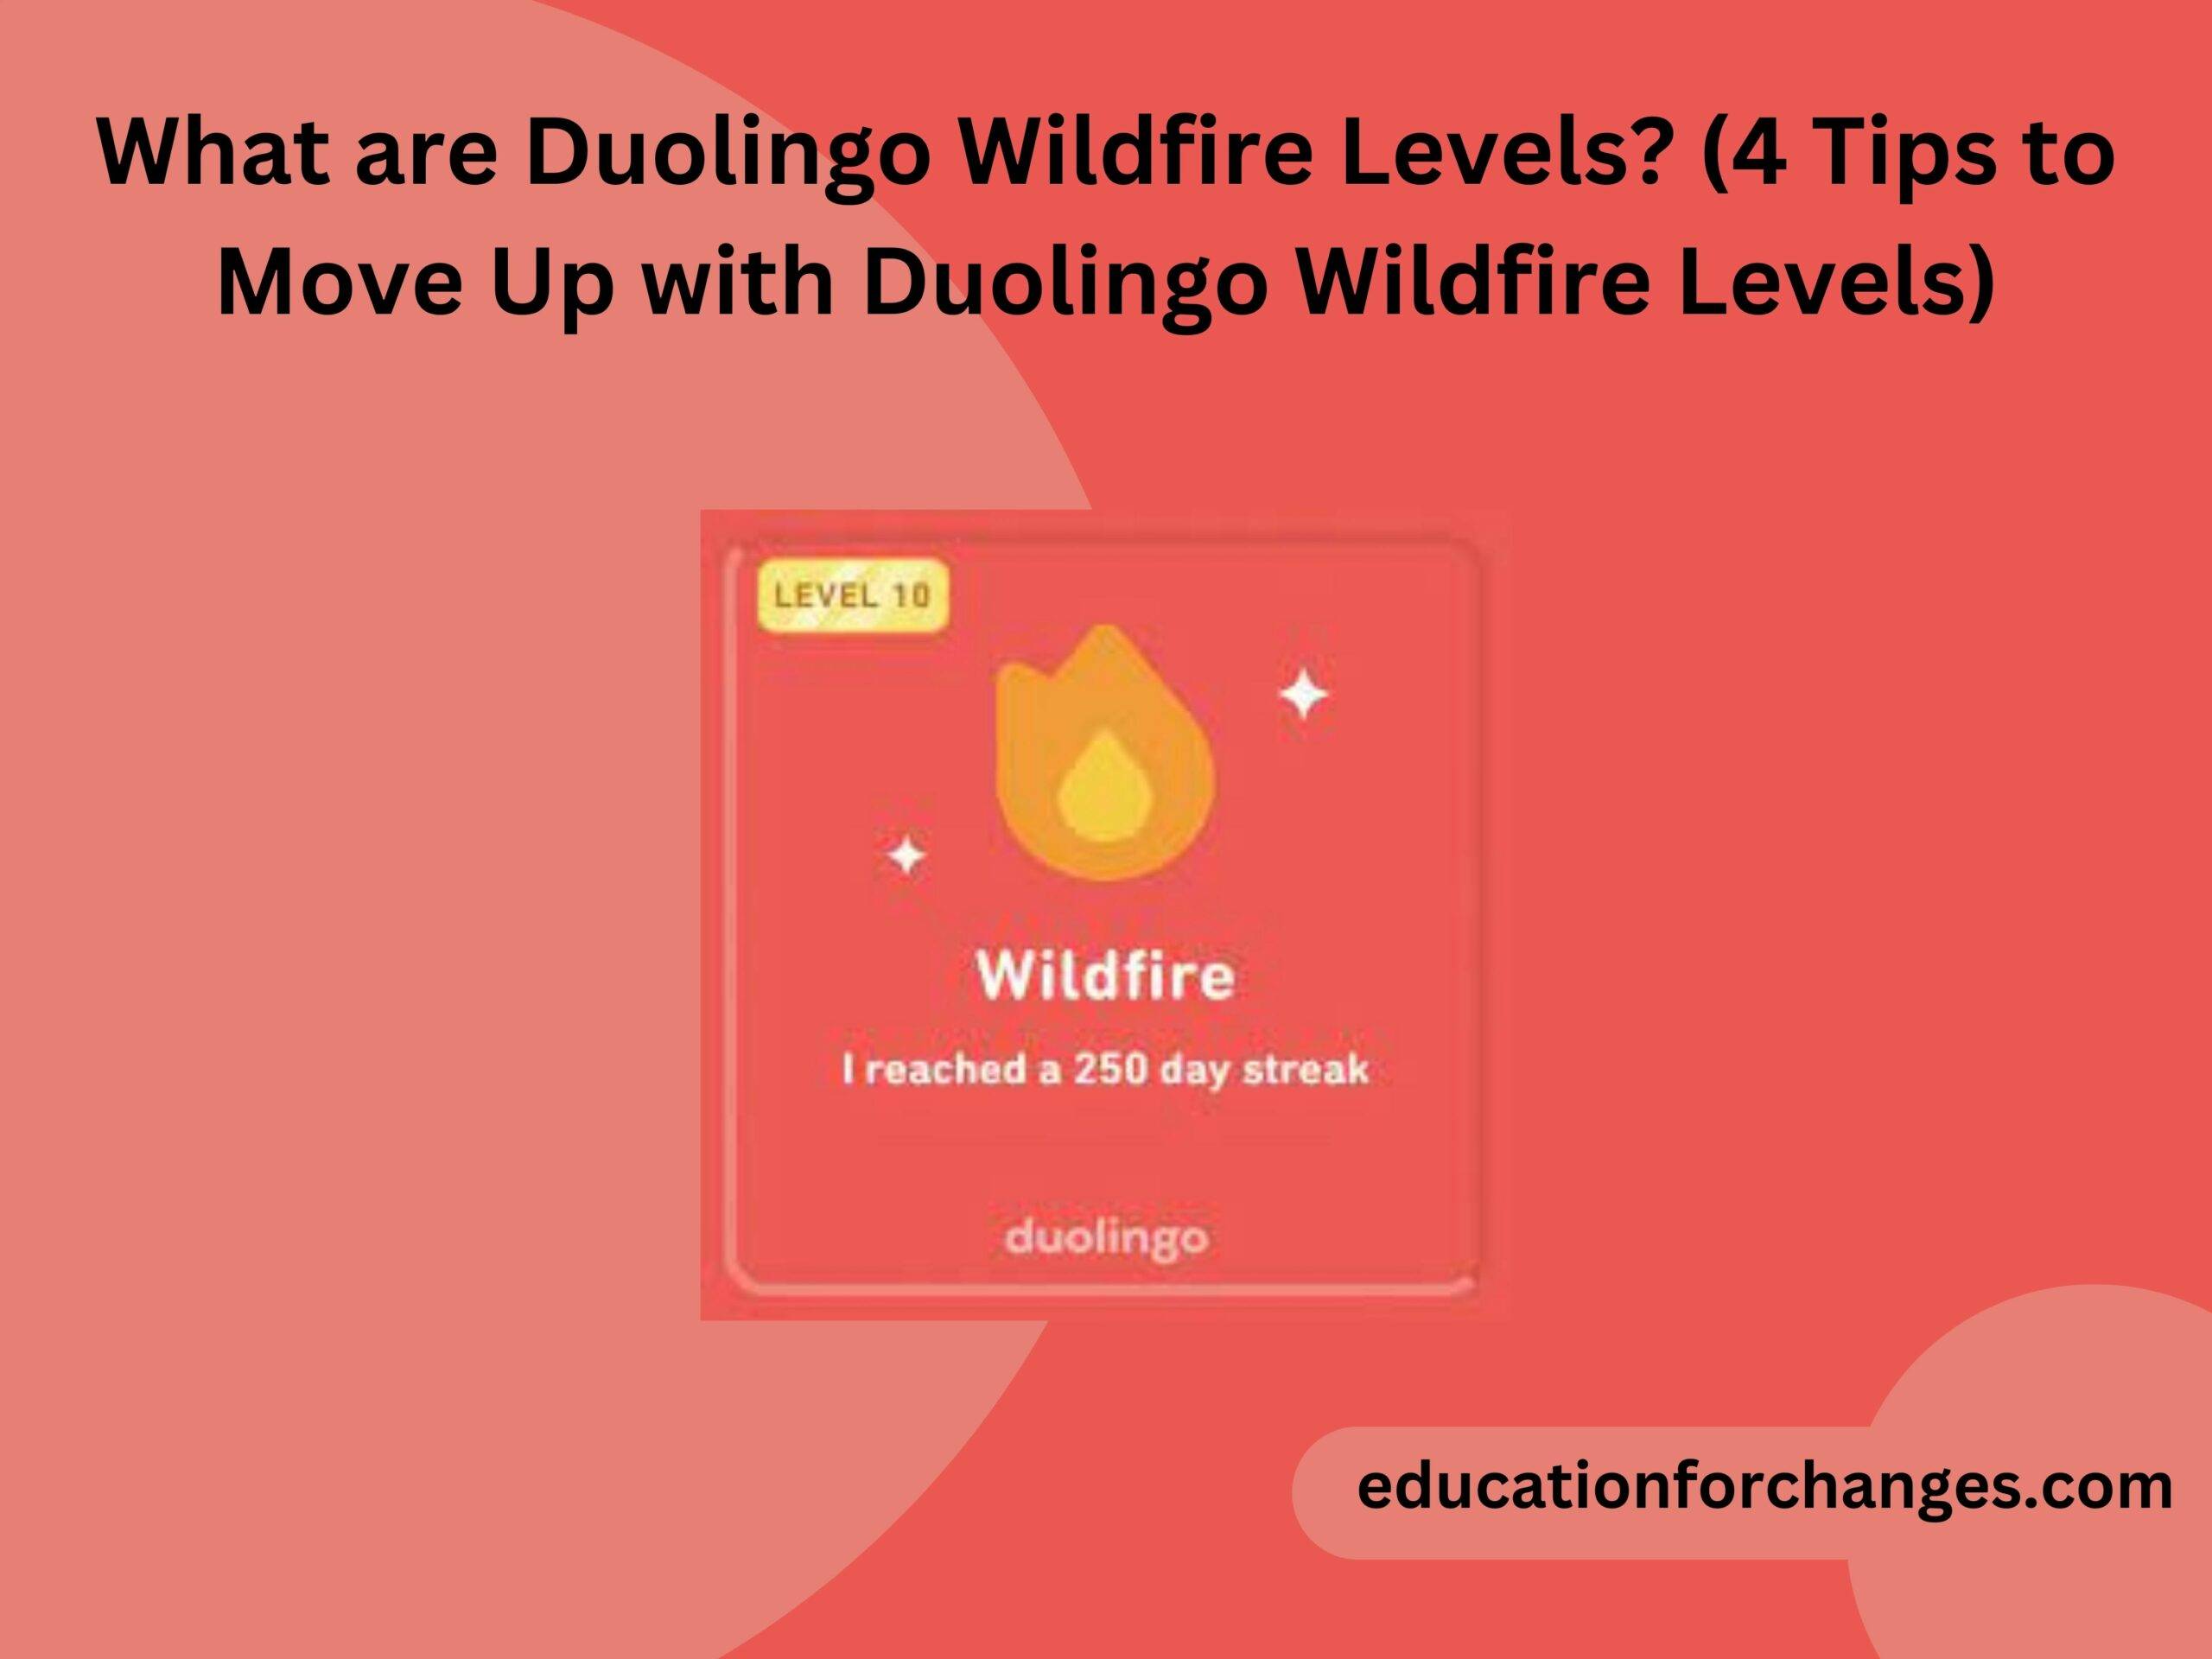 What are Duolingo Wildfire Levels (4 Tips to Move Up with Duolingo Wildfire Levels)